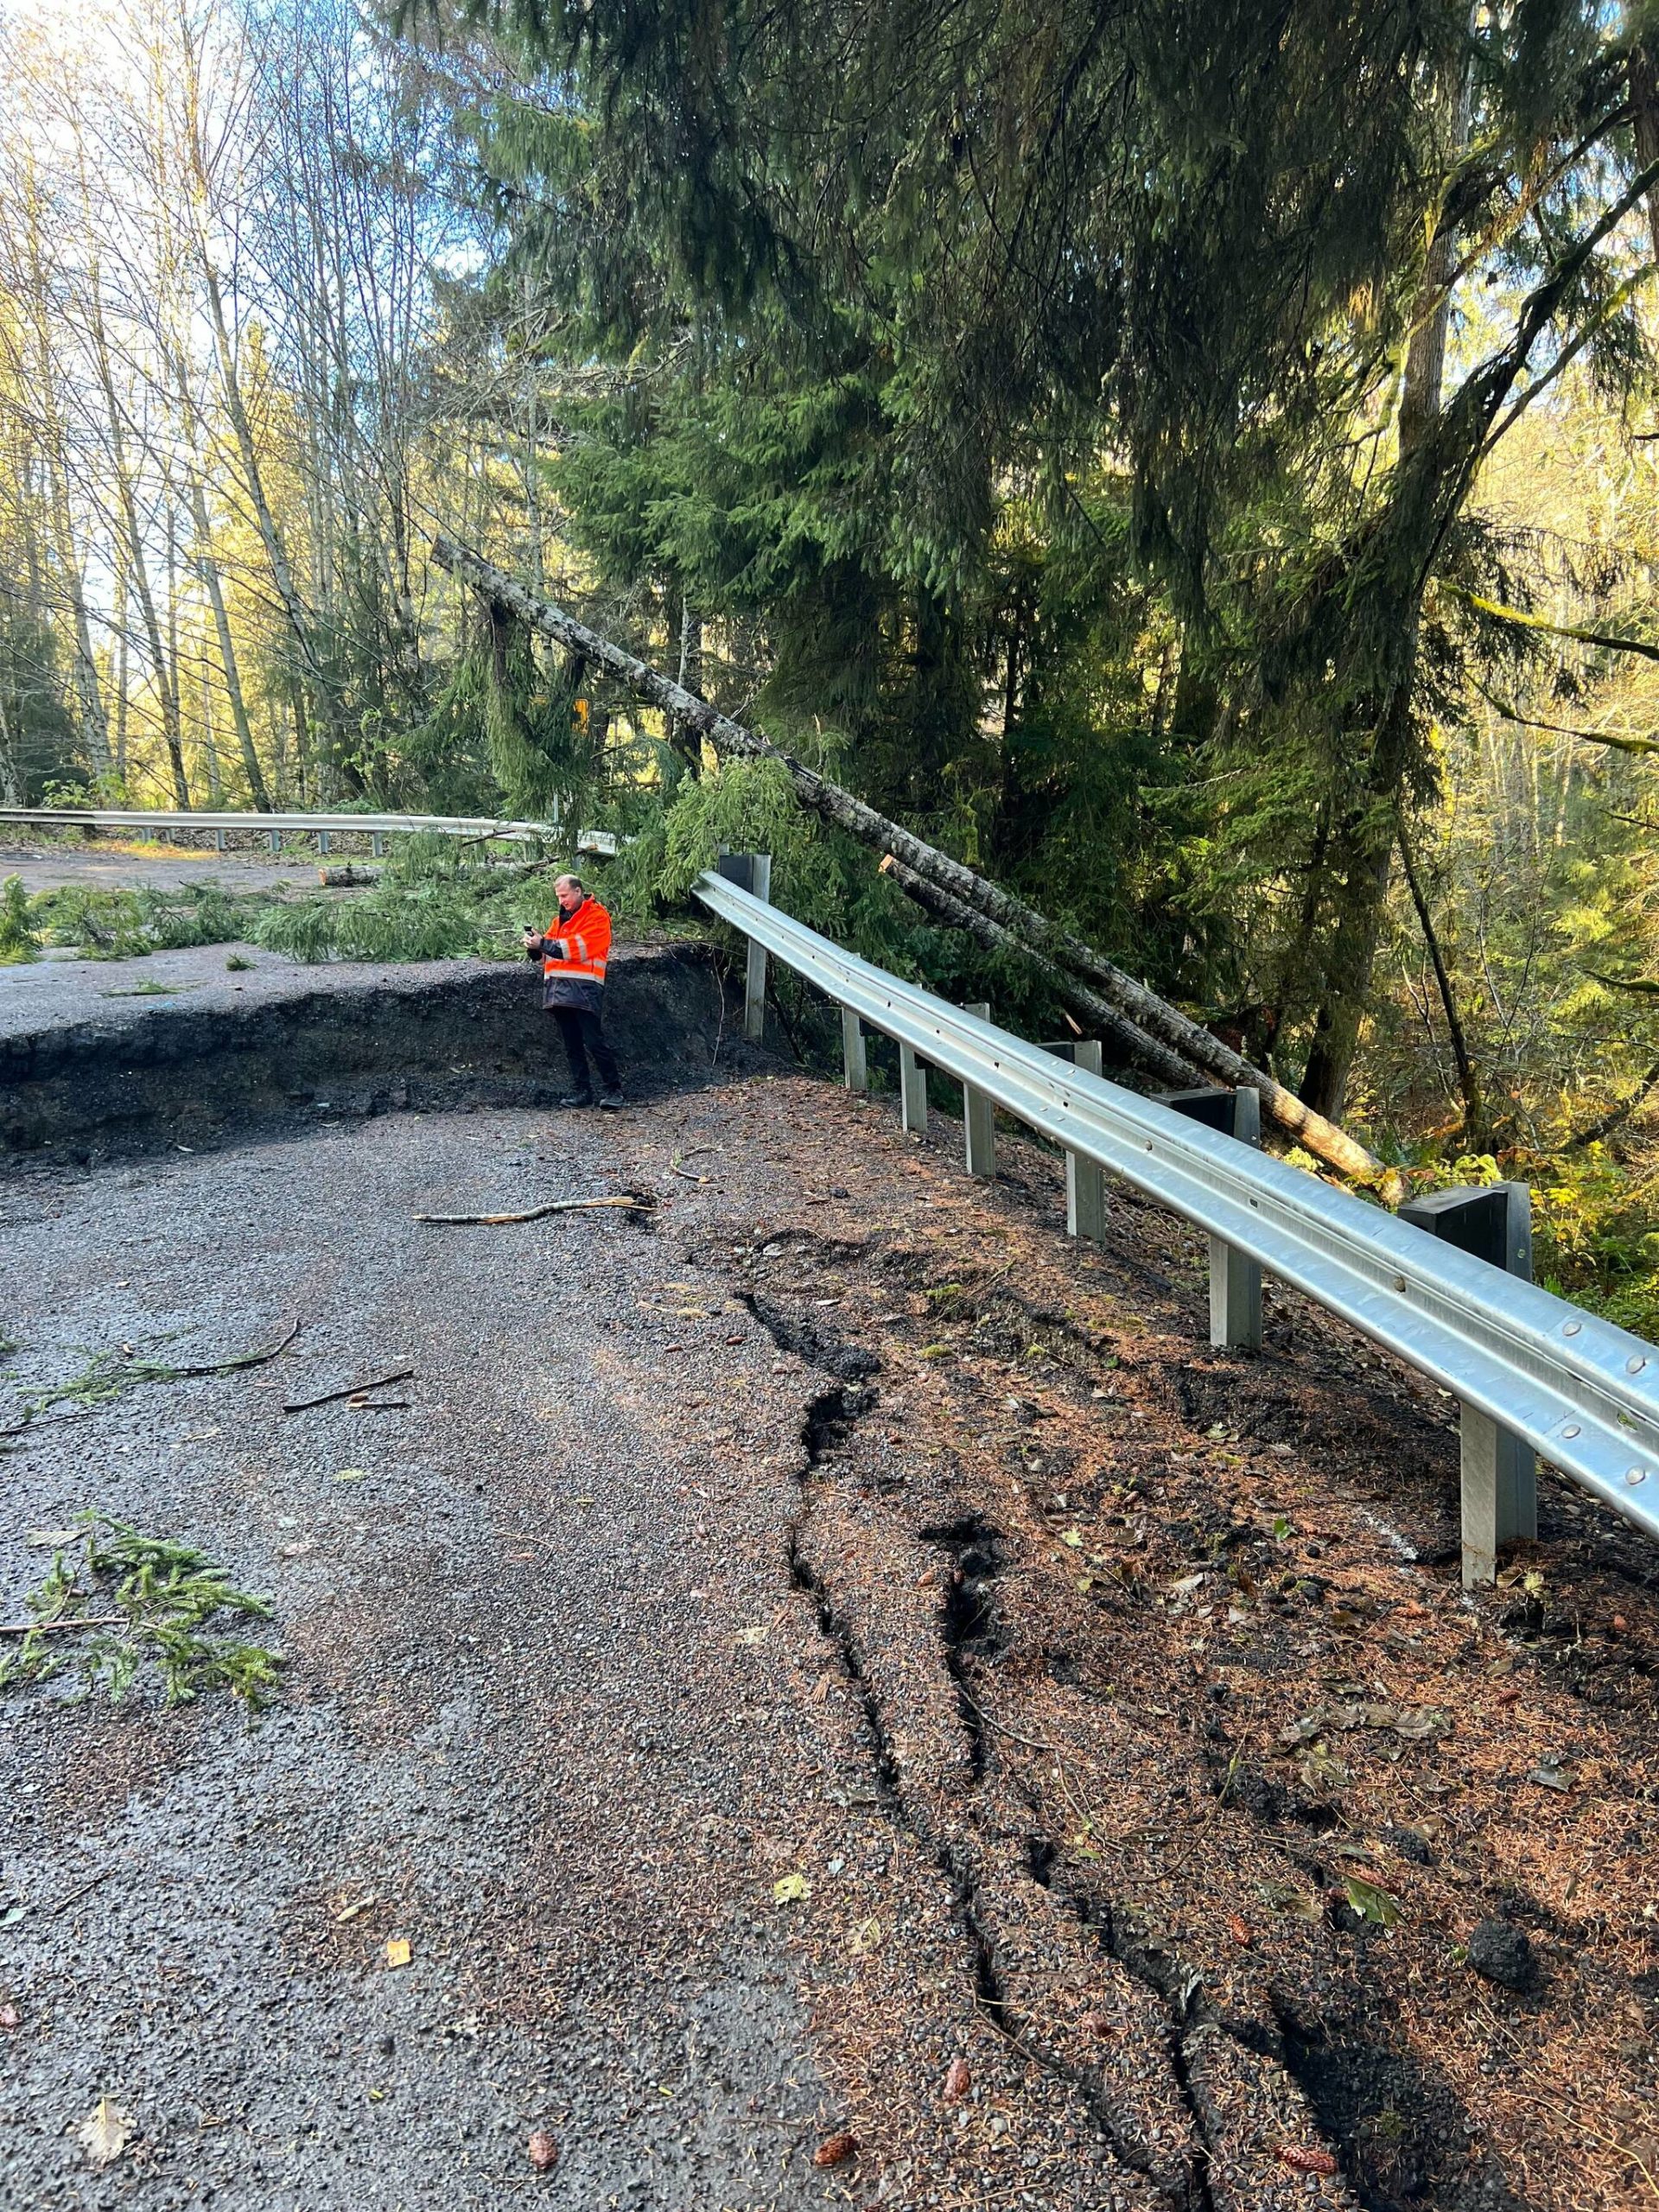 Starting Monday, March 28, construction begins to reopen SR 112 at Jim Creek. The highway dropped four feet in some areas last November following heavy rains. Detour is available via US 101 and SR 113. Work is expected to last 8 weeks. WSDOT Photo